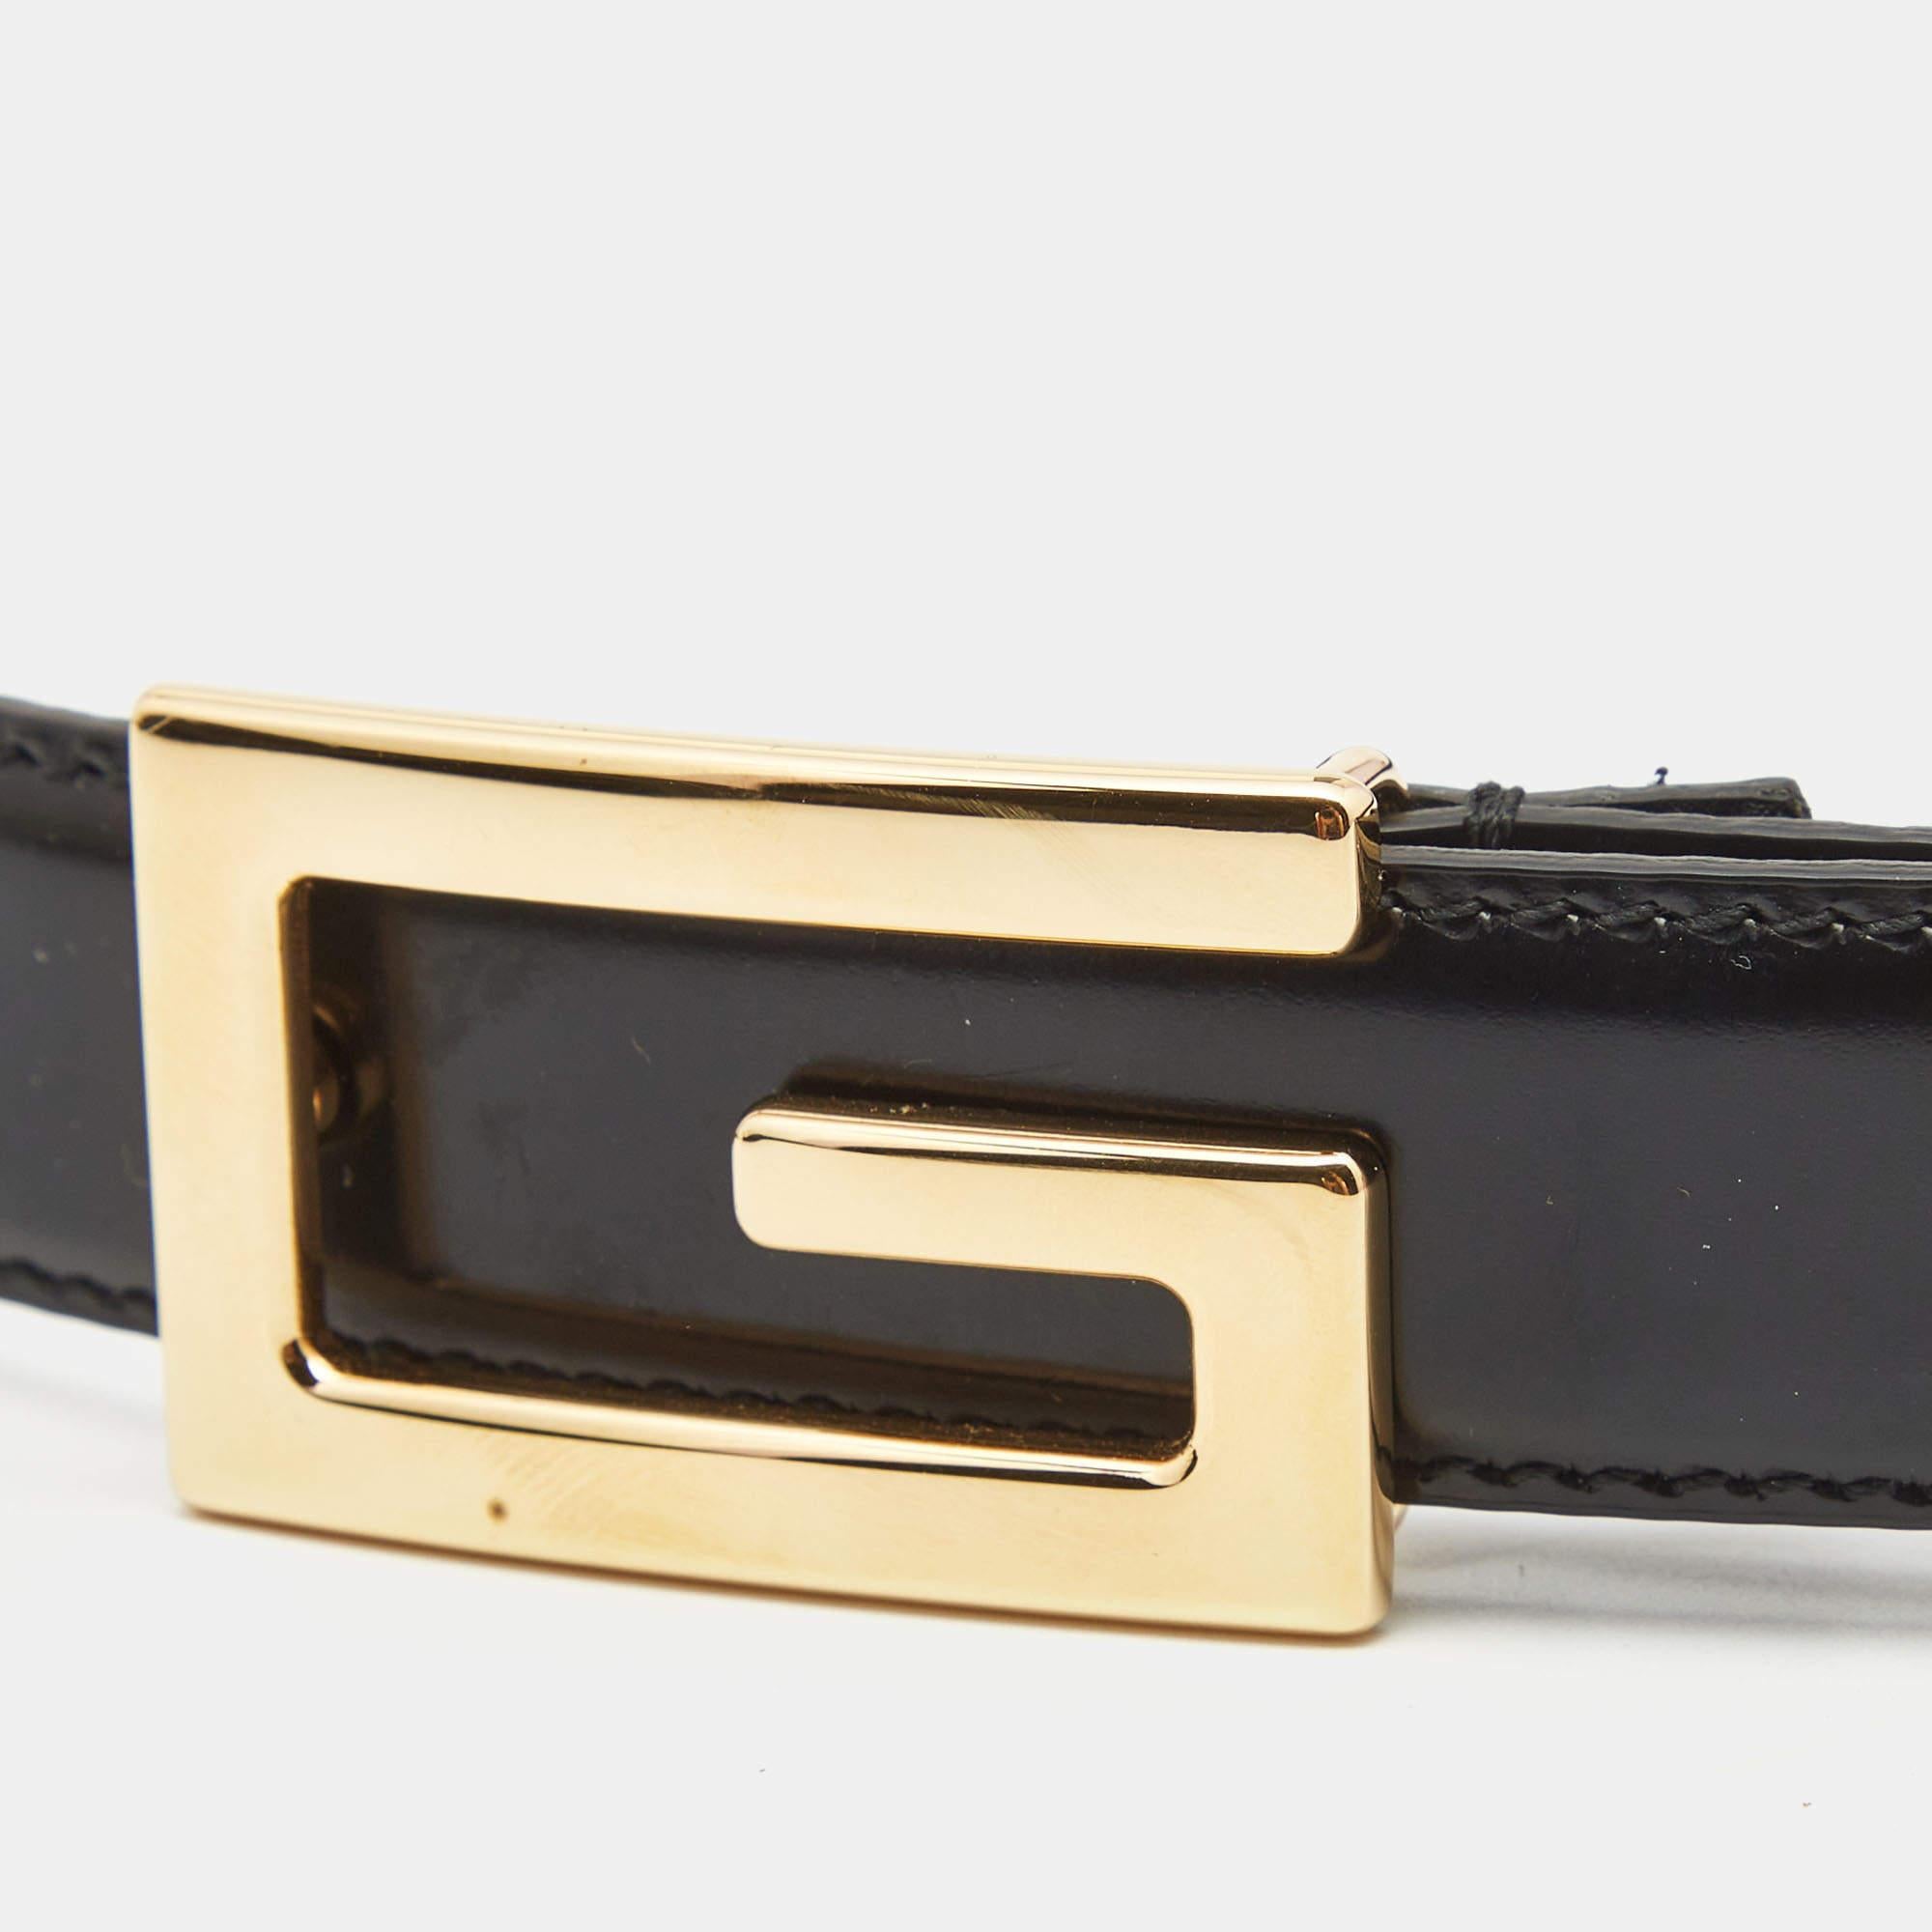 Add a sleek finish to your OOTD with this authentic Gucci men's belt. It is carefully crafted to last well and boost your style for a long time.

Includes: Original Dustbag